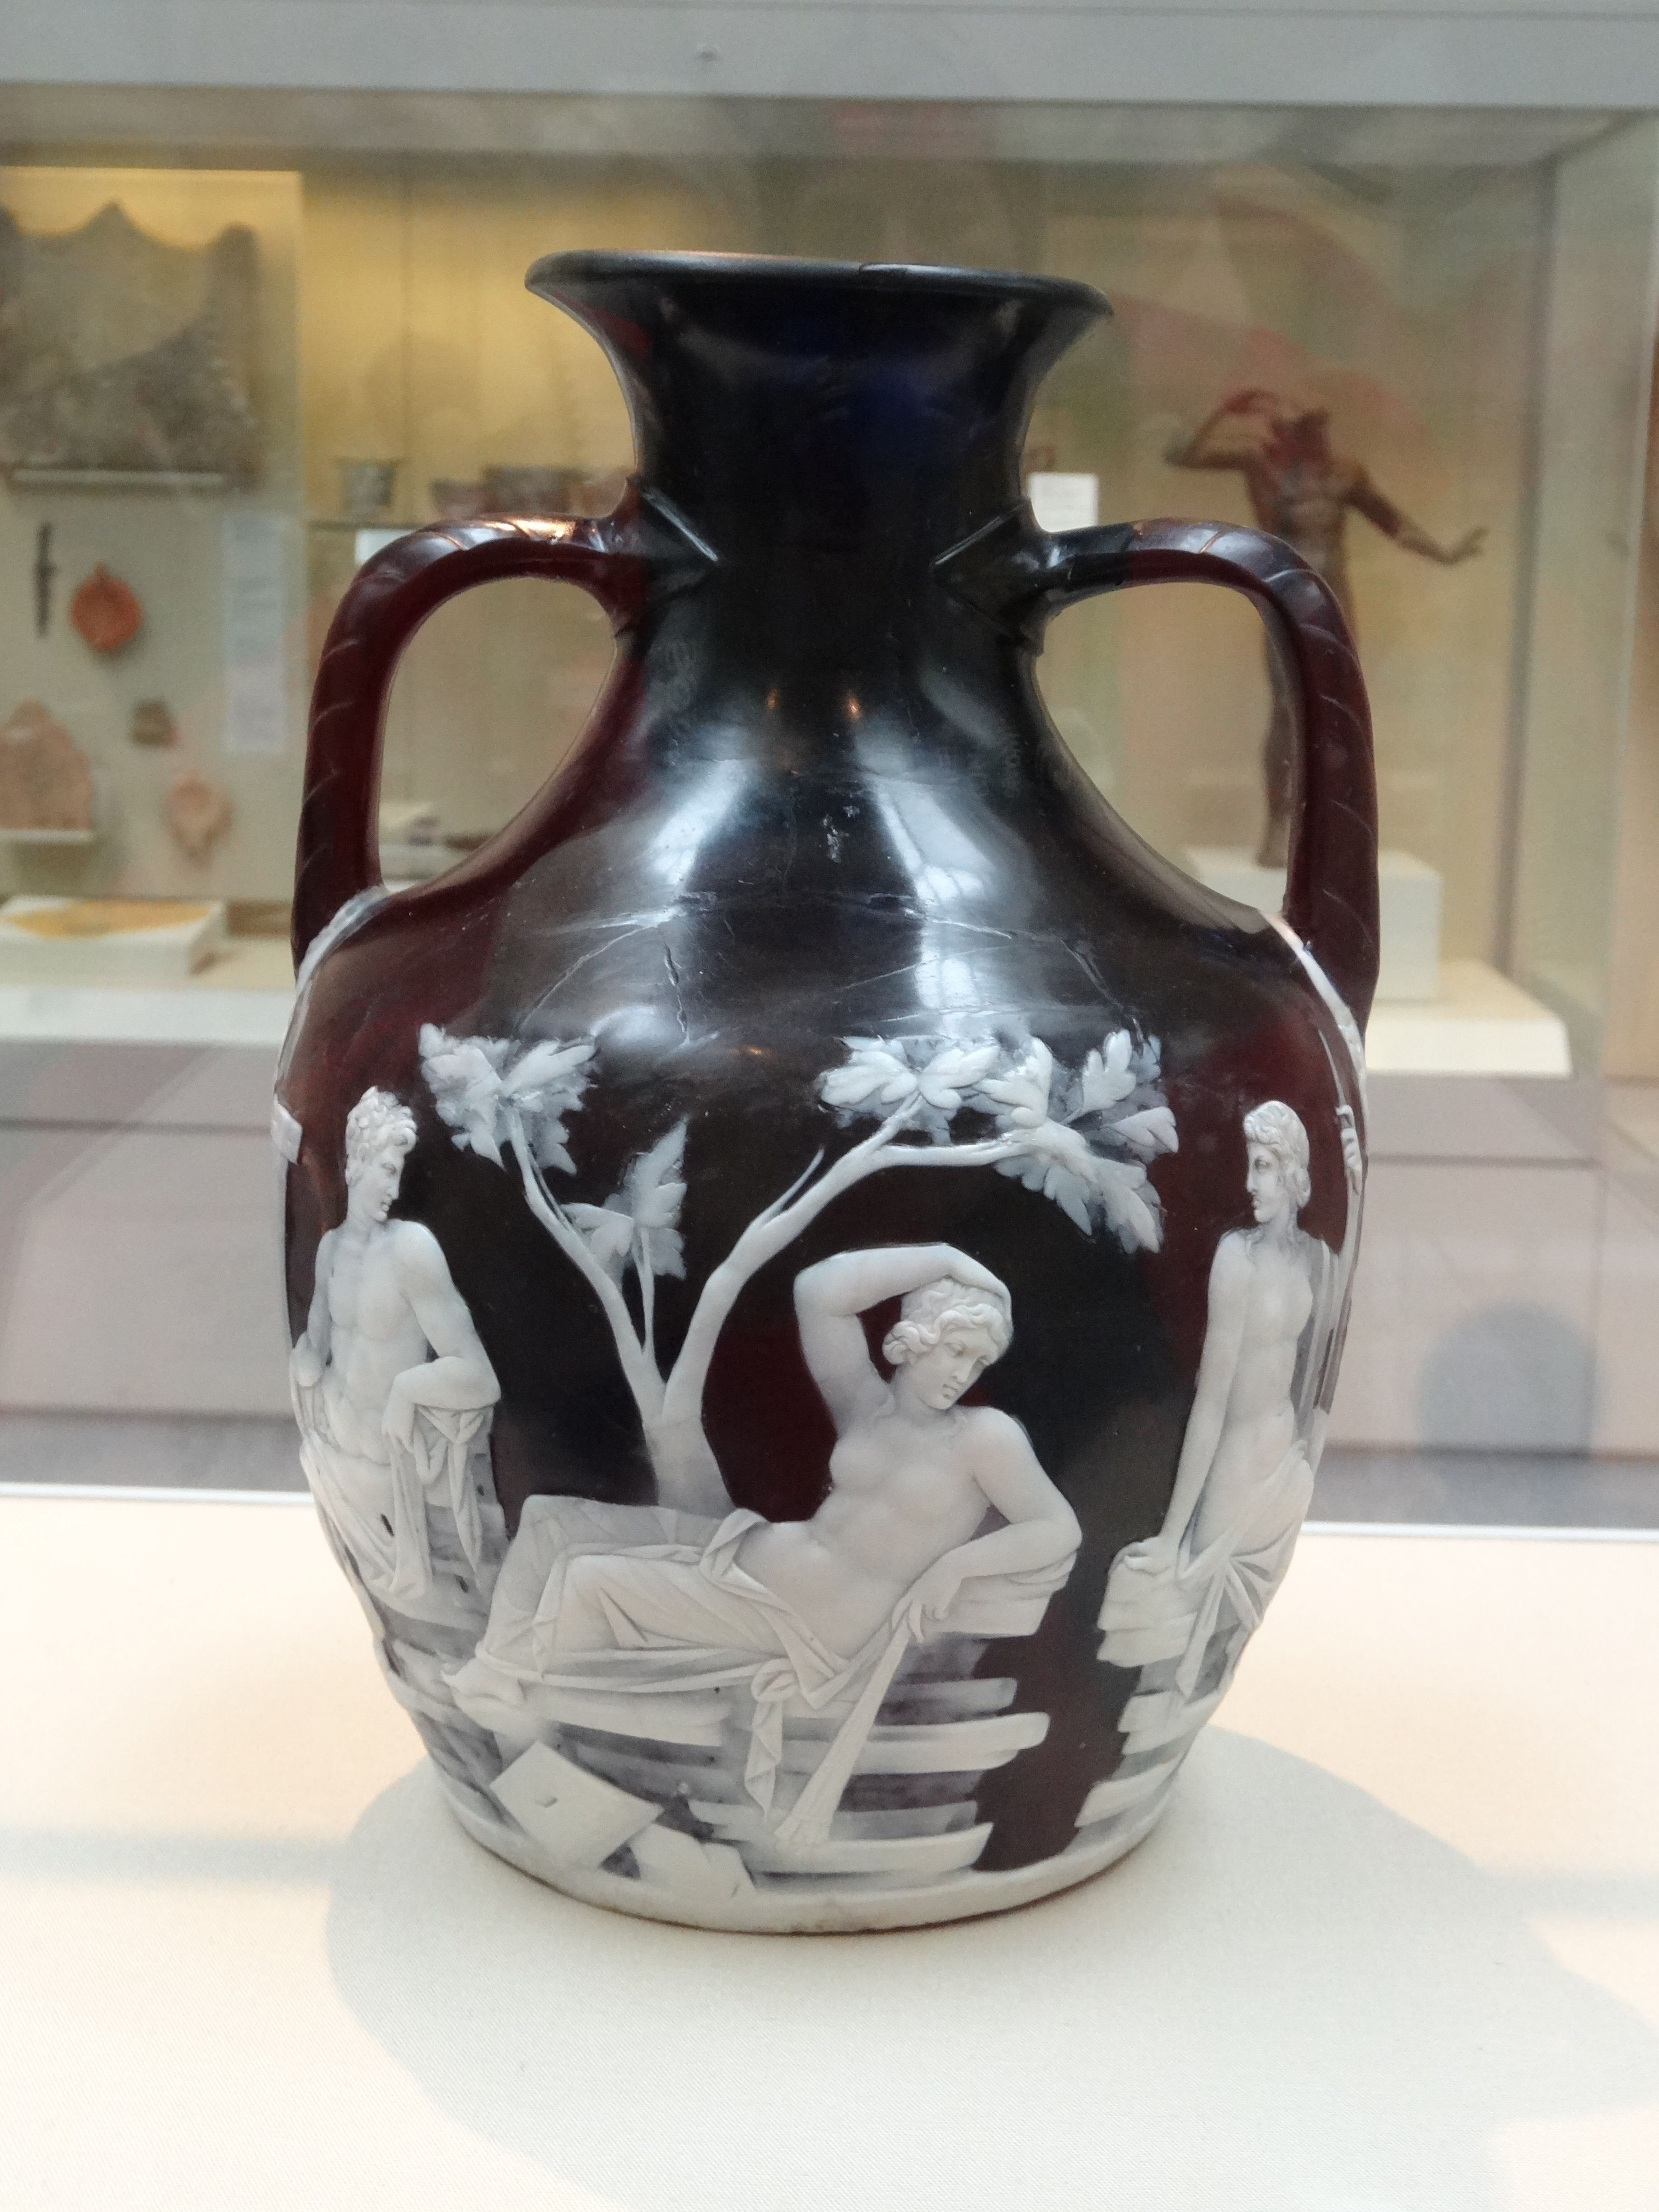 26 Amazing the Portland Vase 2024 free download the portland vase of british museum portland roman glass vase my holidays pinterest intended for british museum portland roman glass vase